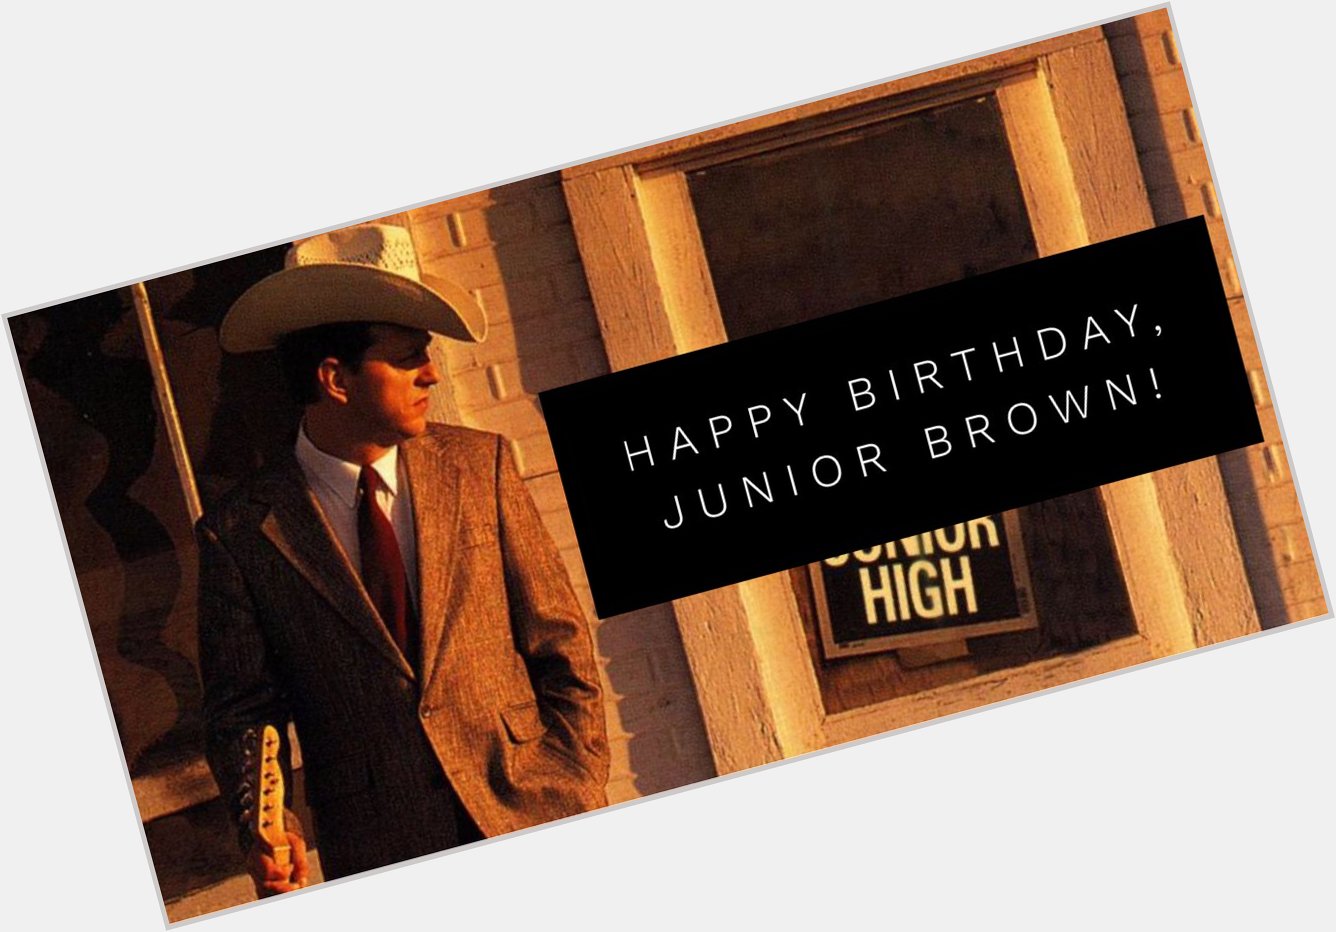 Happy 67th Birthday to Junior Brown! What s your favorite tune from this super-picker!?  